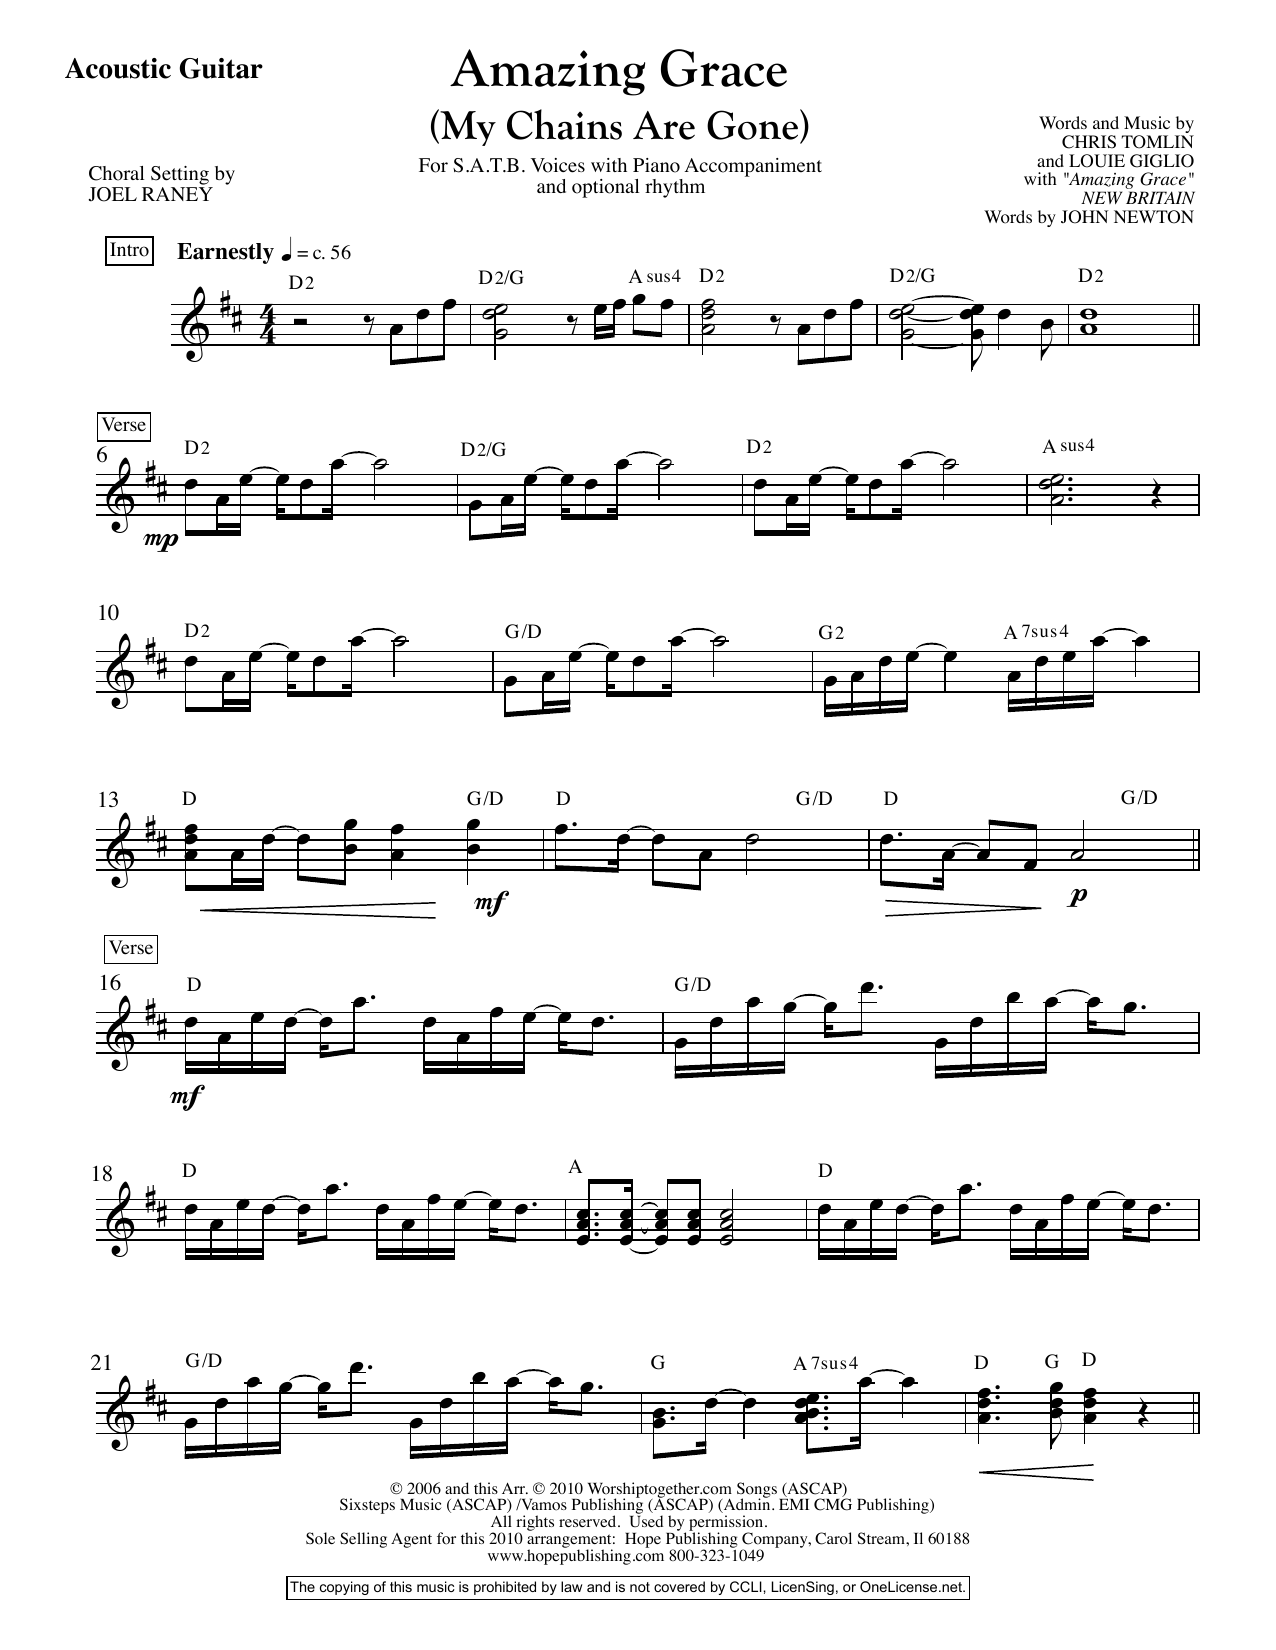 Download Joel Raney Amazing Grace (My Chains Are Gone) - Ac Sheet Music